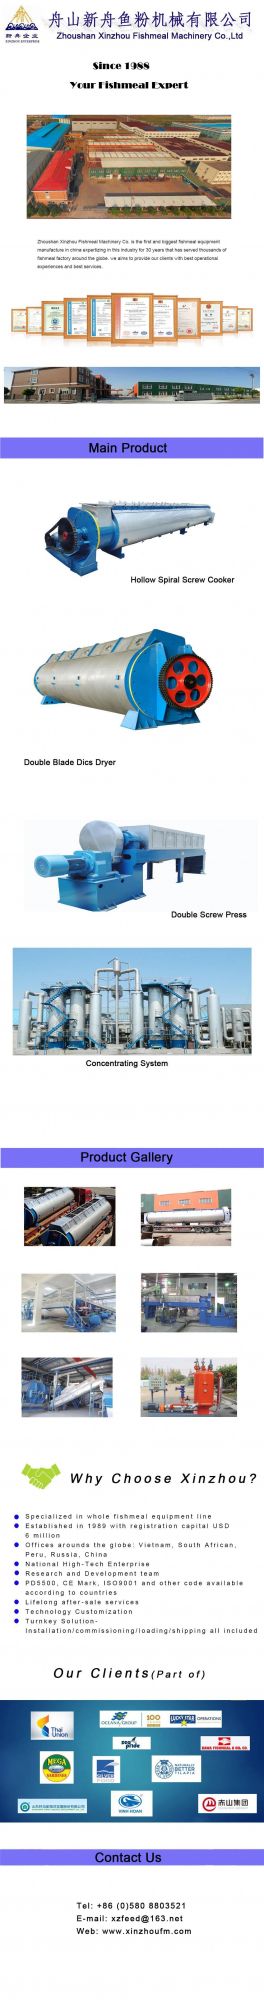 Poultry Meal Production Line (Xinzhou Brand)